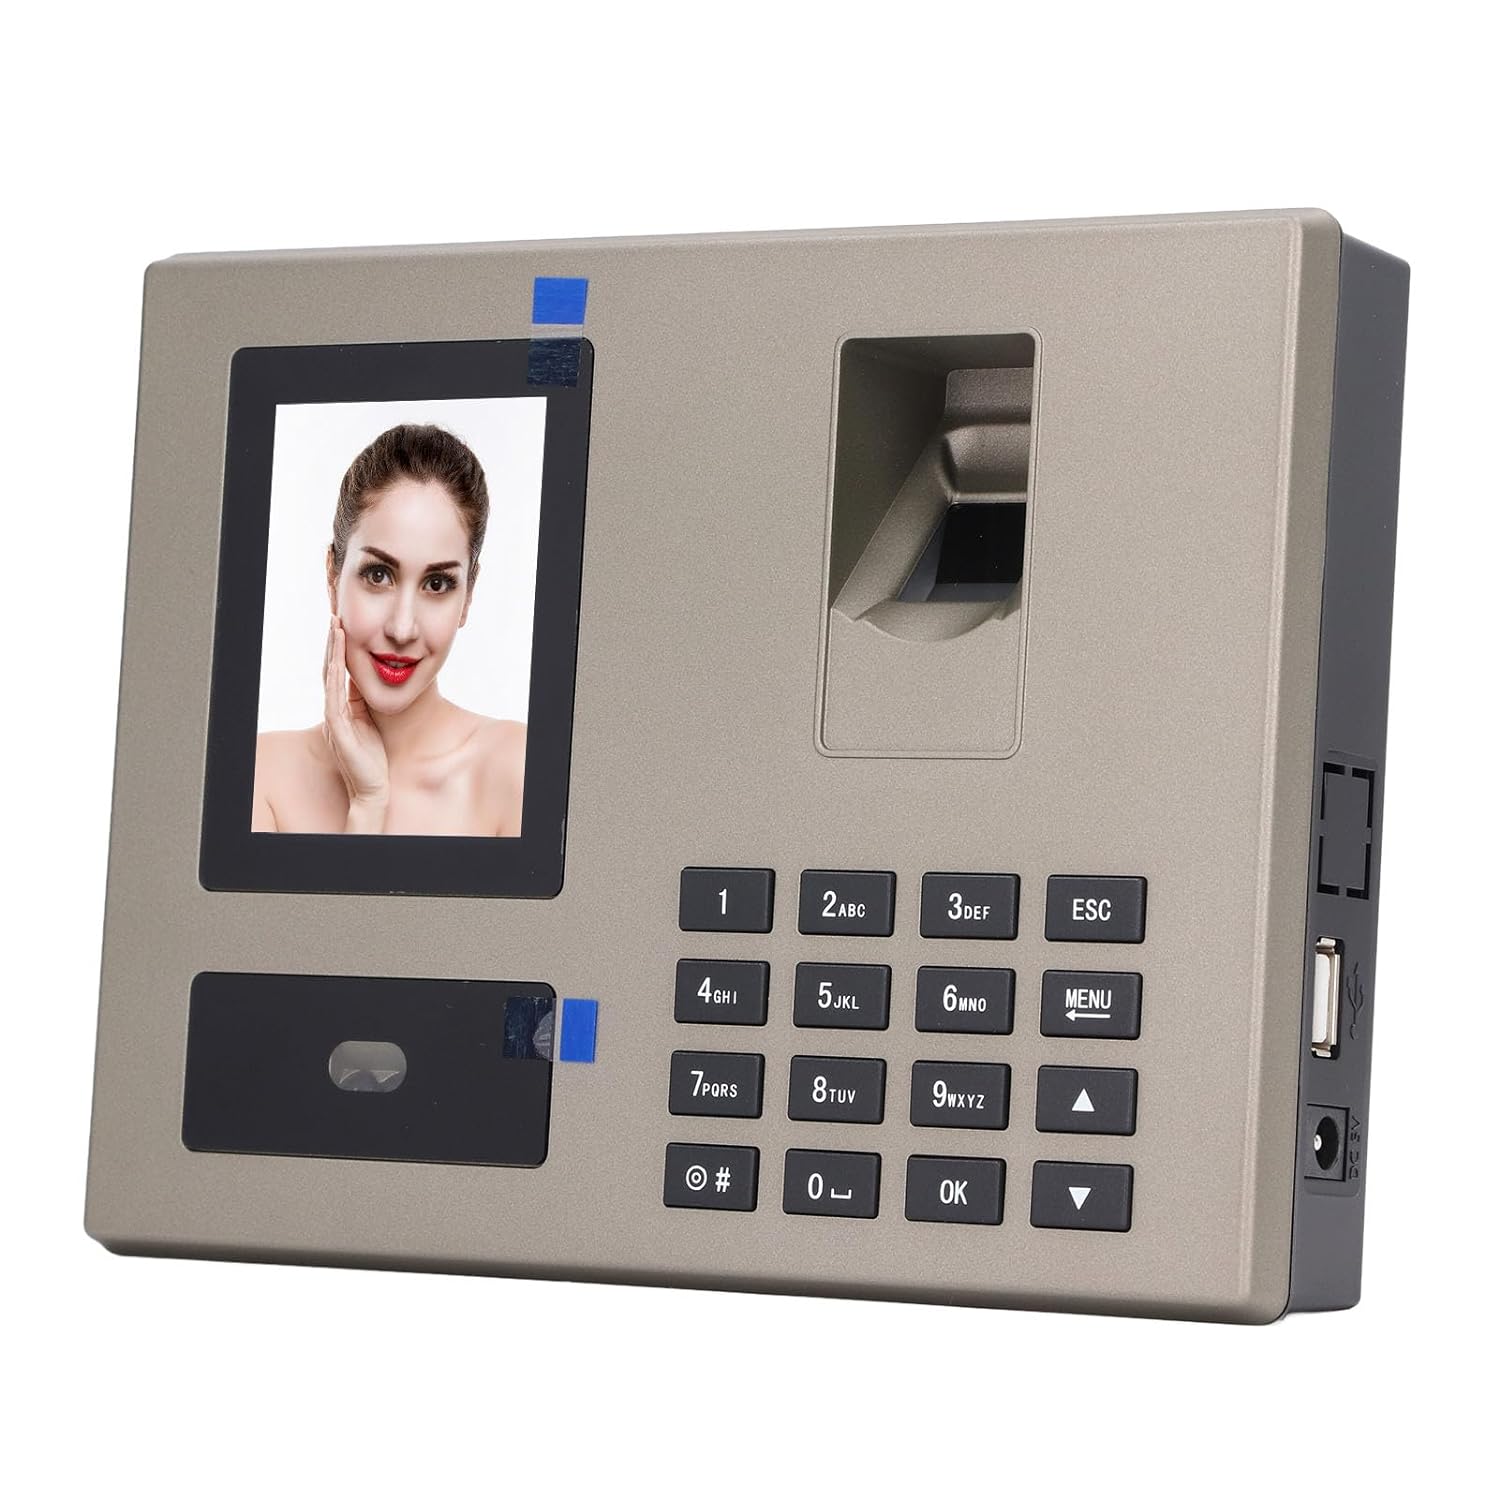 100-240V Employee Attendance Machine Face Biometric Point Attendance Machine Hot Voice PIN Punching for Office (US Plug)